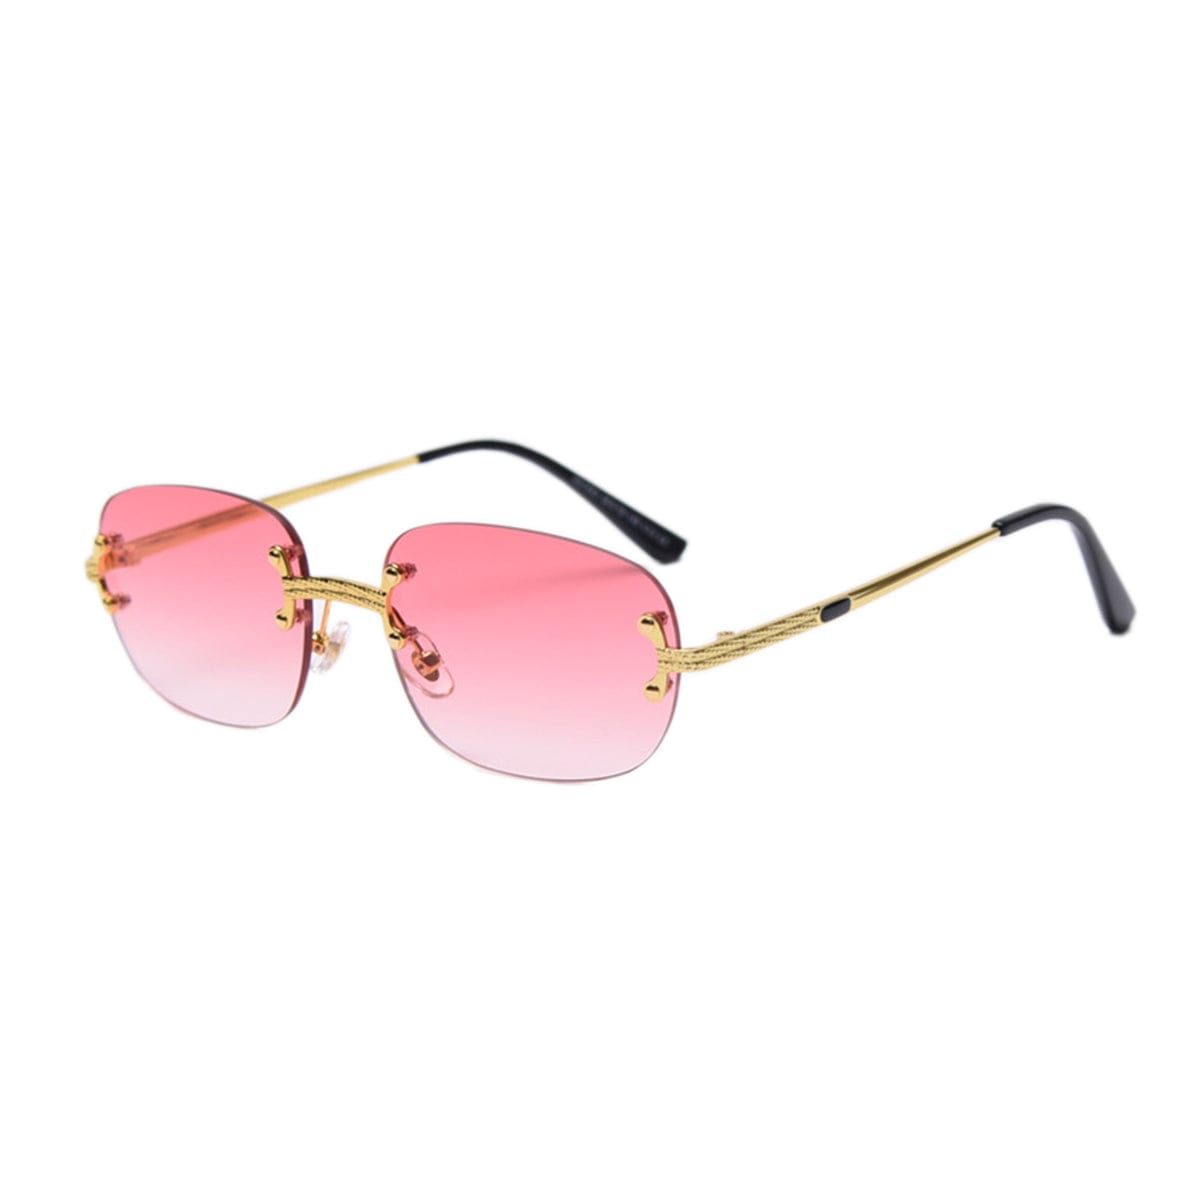 Pink rectangle sunglasses - Primo Collection 